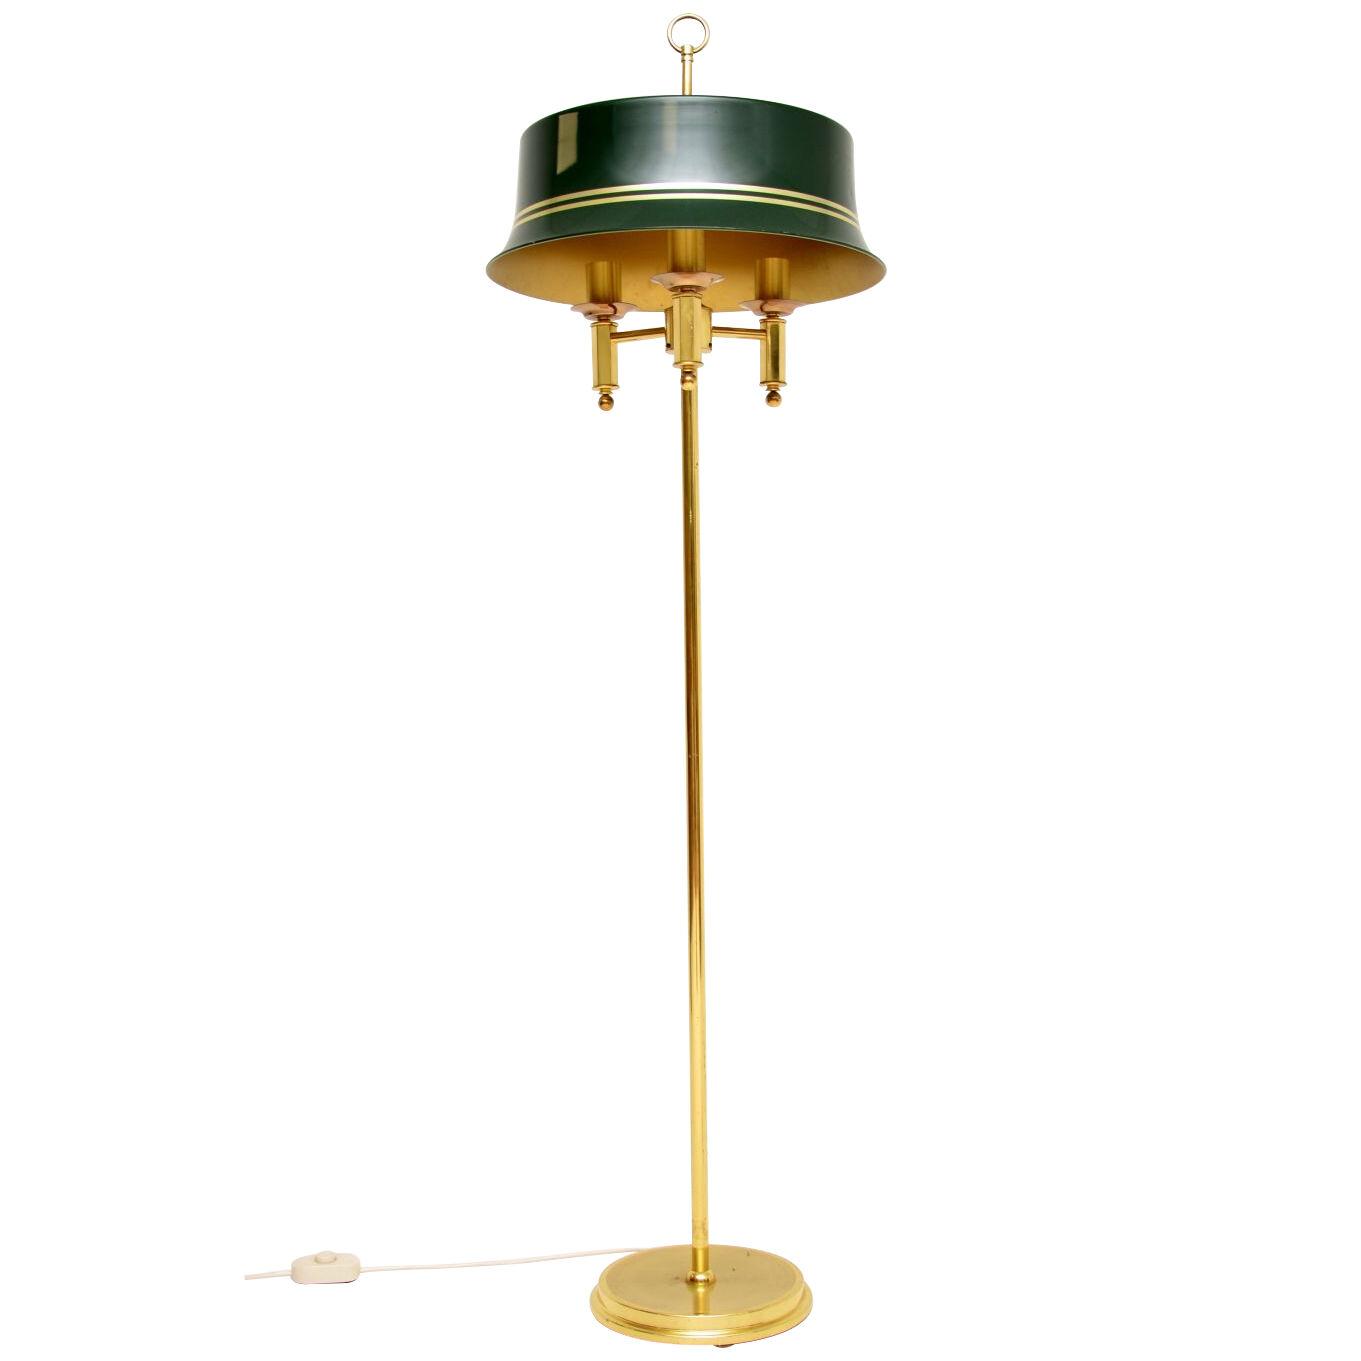 Antique Neoclassical Style Brass & Tole Floor Lamp